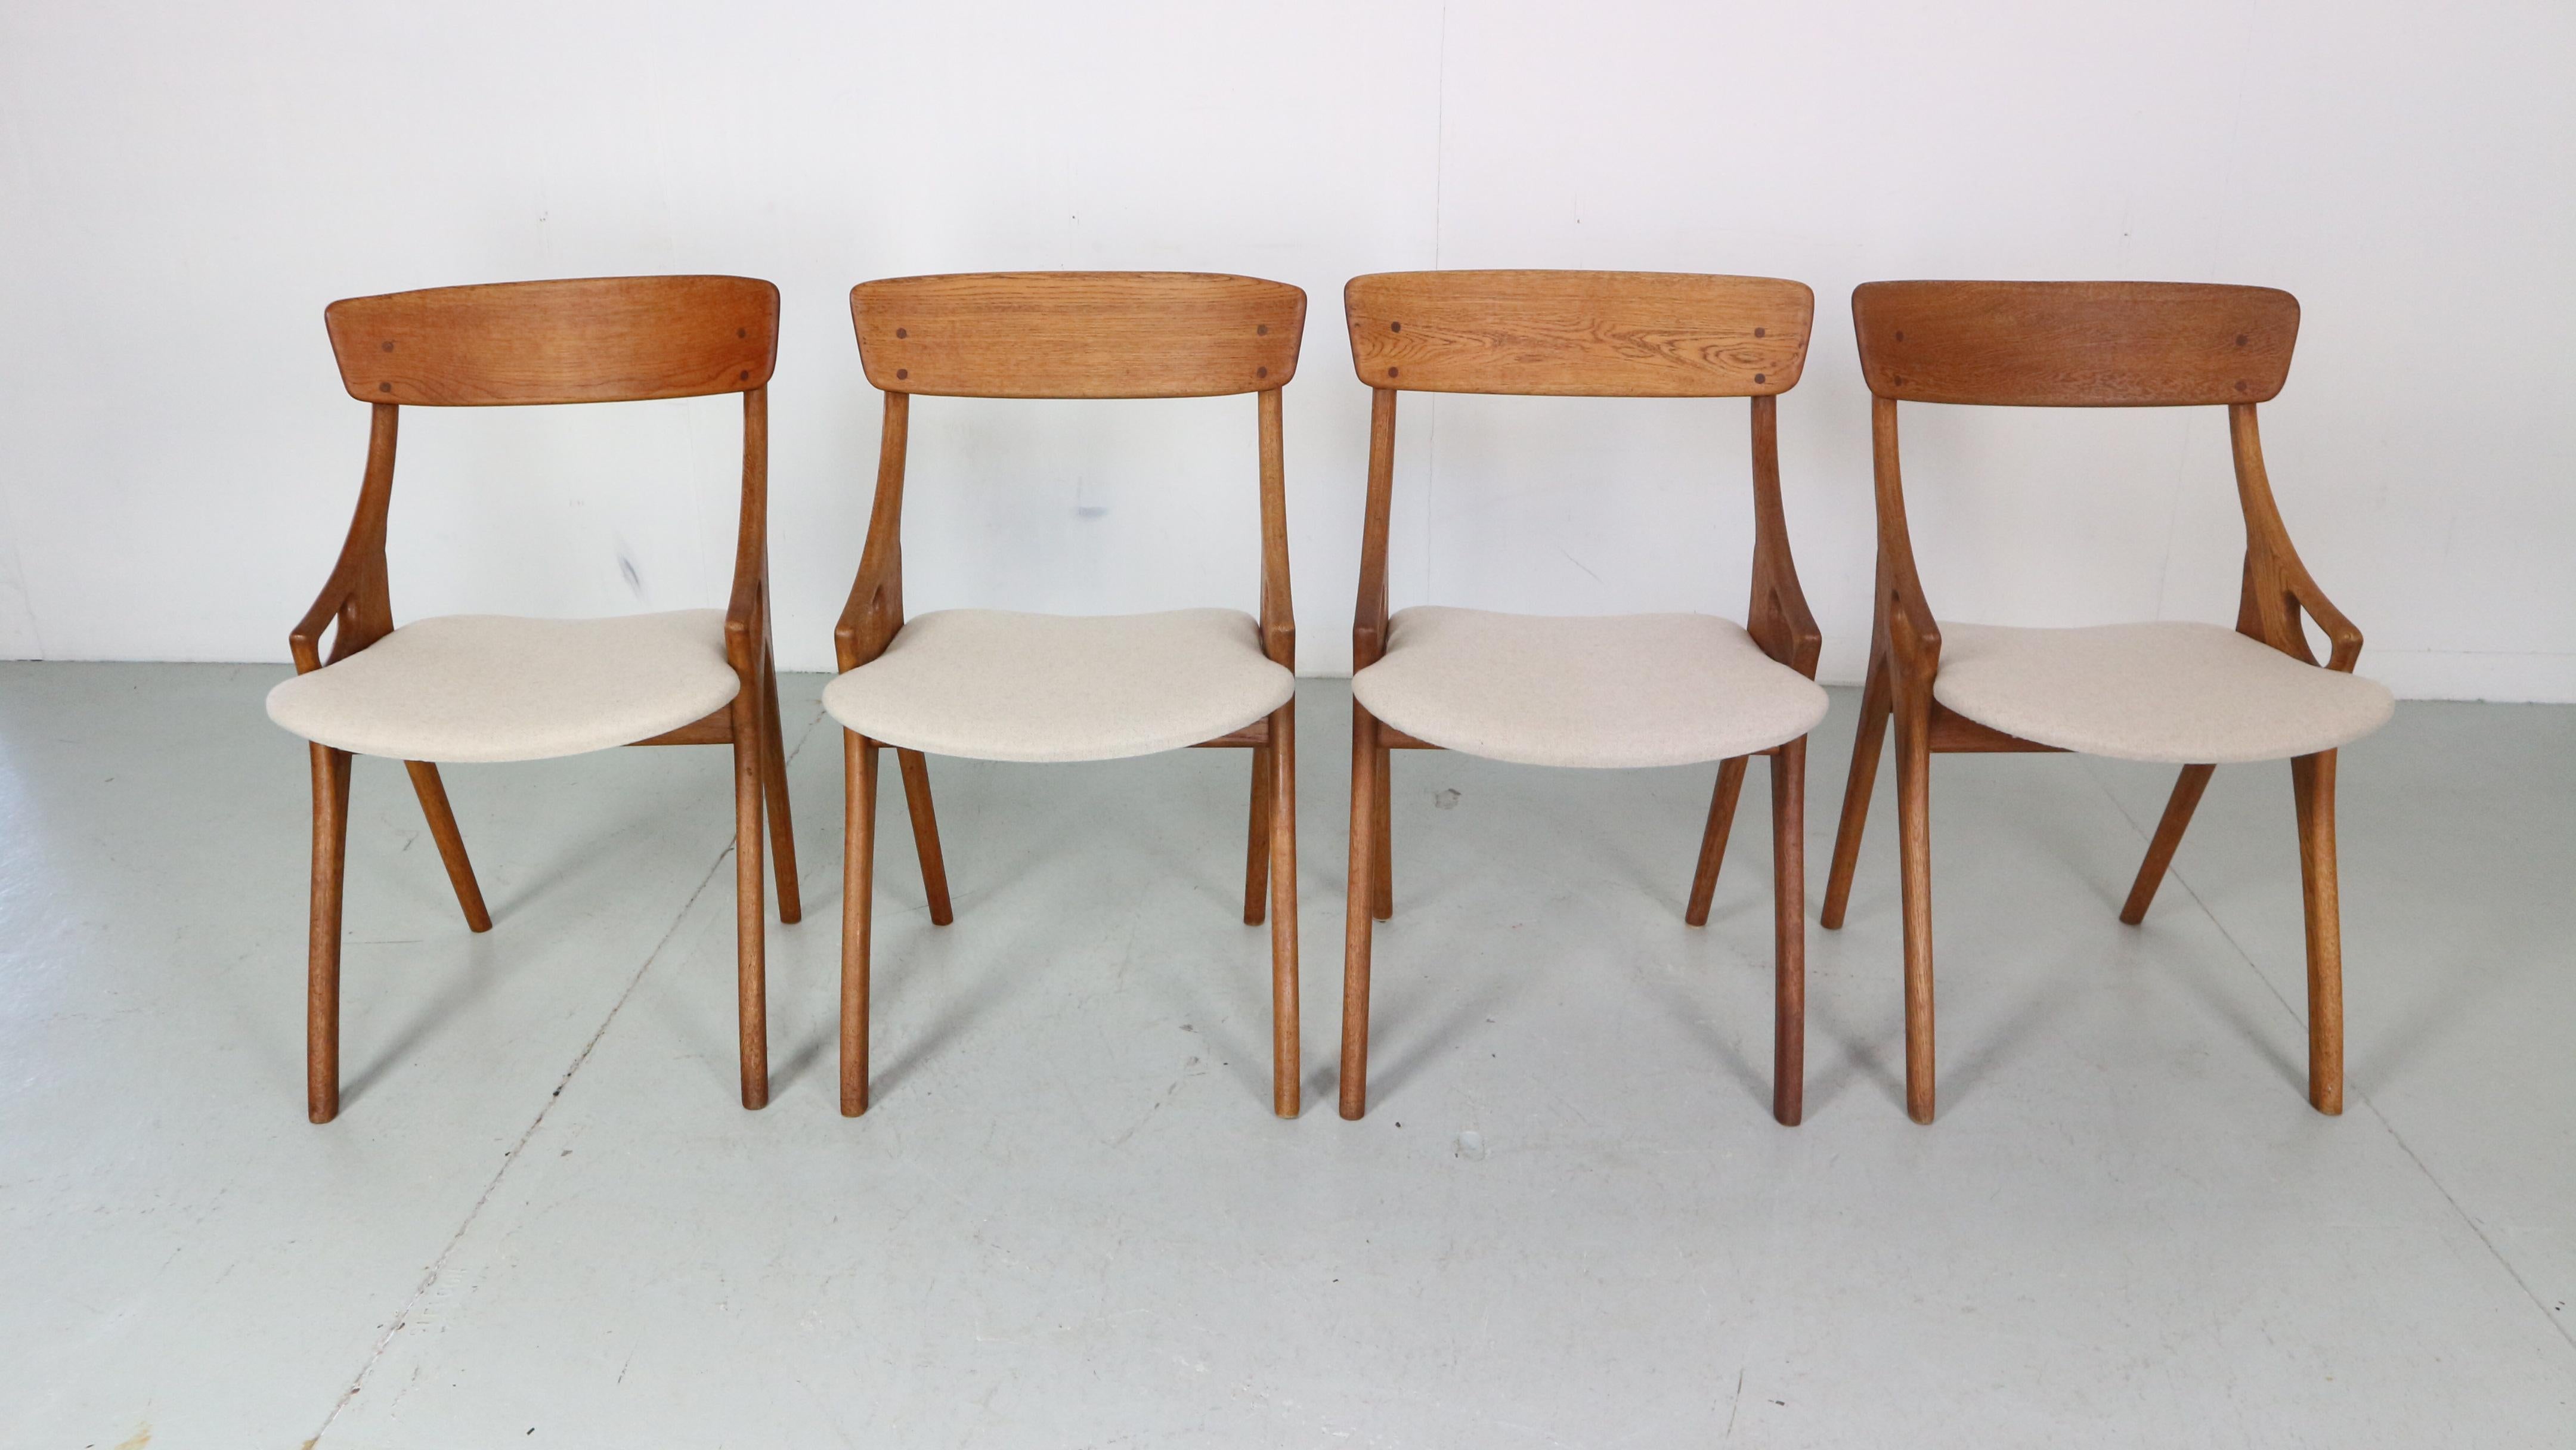 Mid-Century Modern set of 4 dinning room chairs design by Arne Hovmand Olsen for Mogens Kold, 1959 Denmark.

Model number: 71.

The sculptural set of four dining chairs made from teak wood. 
The chairs are organic in their shape as can be seen